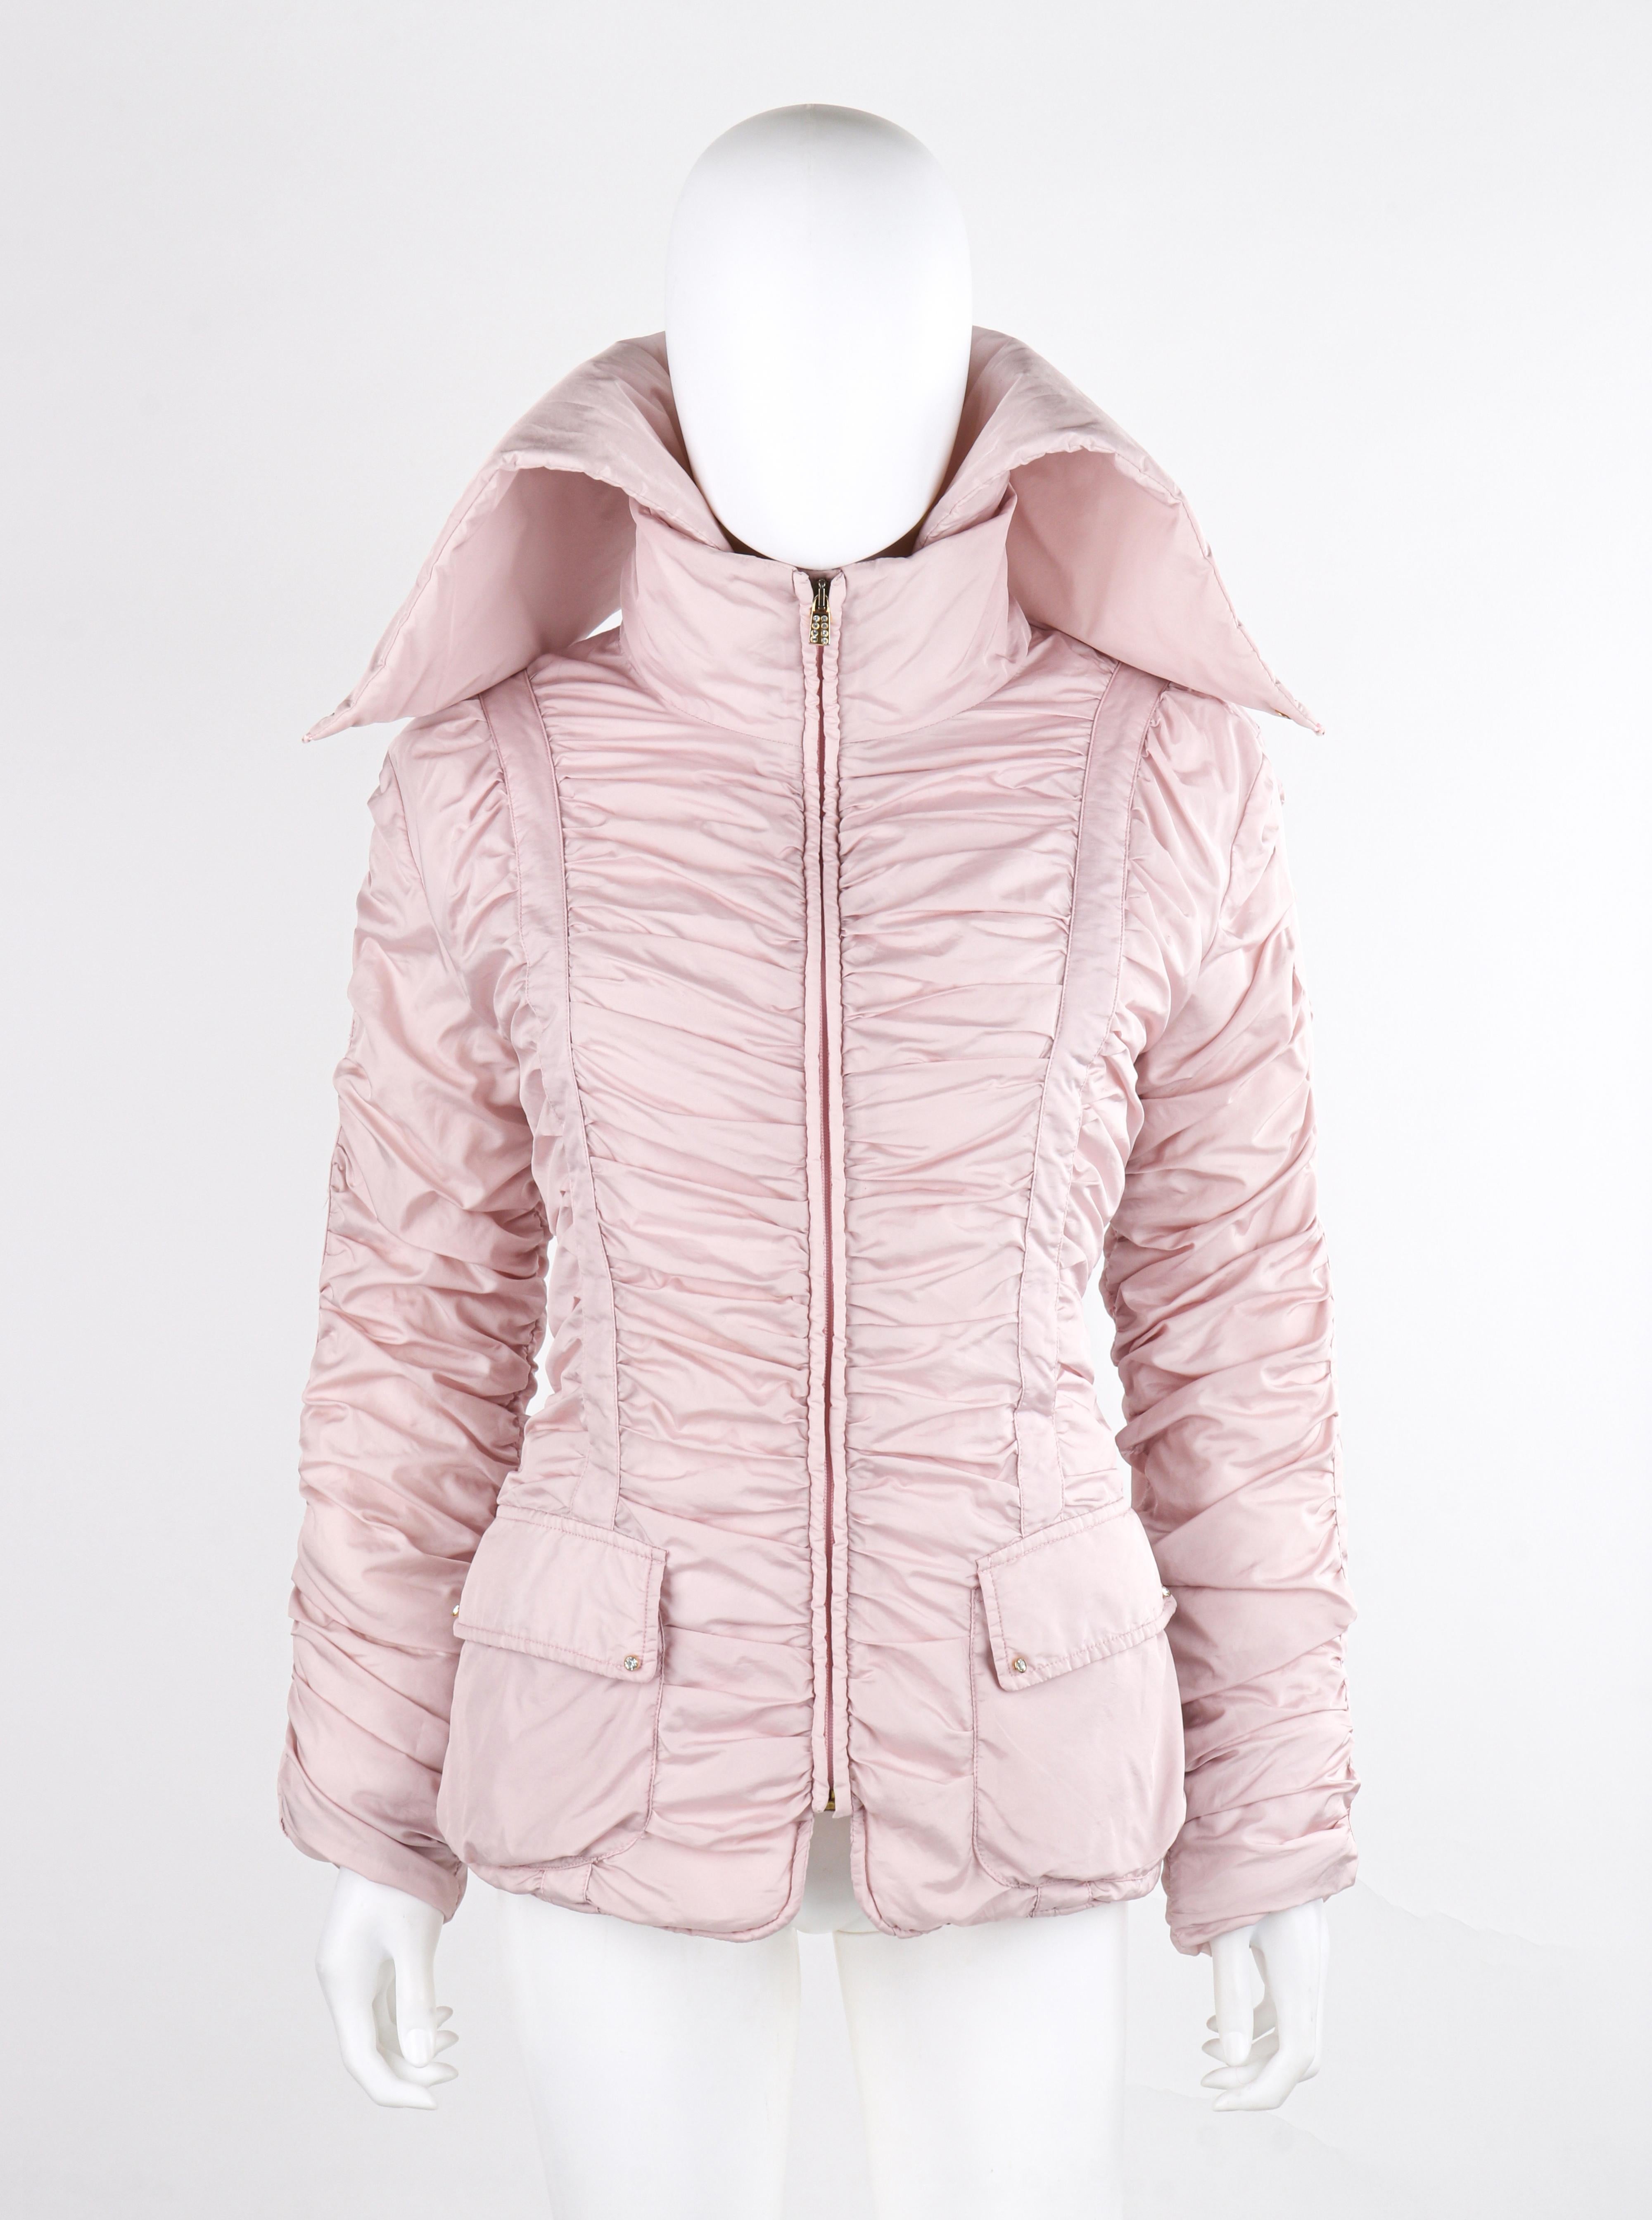 ALEXANDER McQUEEN c.1990's Vtg Pink Ruched Hooded Zip Up Puffer Jacket Coat In Good Condition For Sale In Thiensville, WI